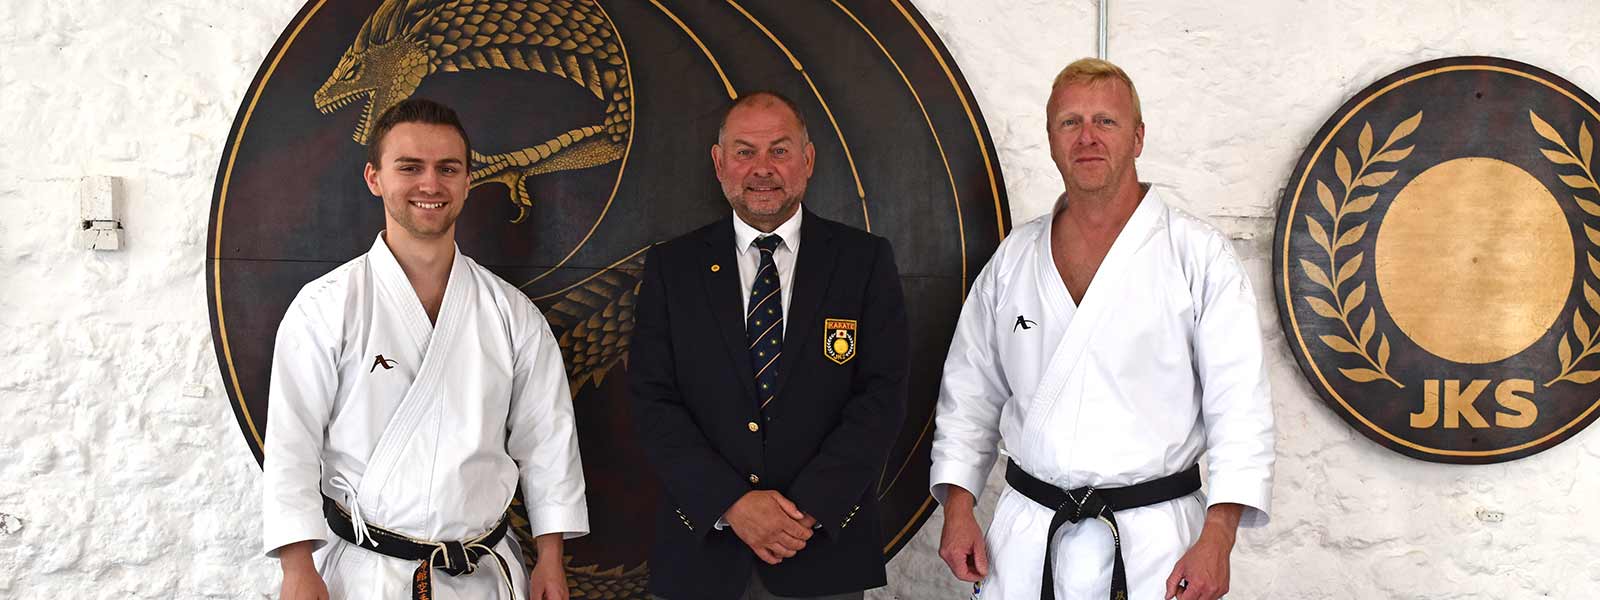 Sensei Steven Connell after passing his 3rd Dan crossover examination